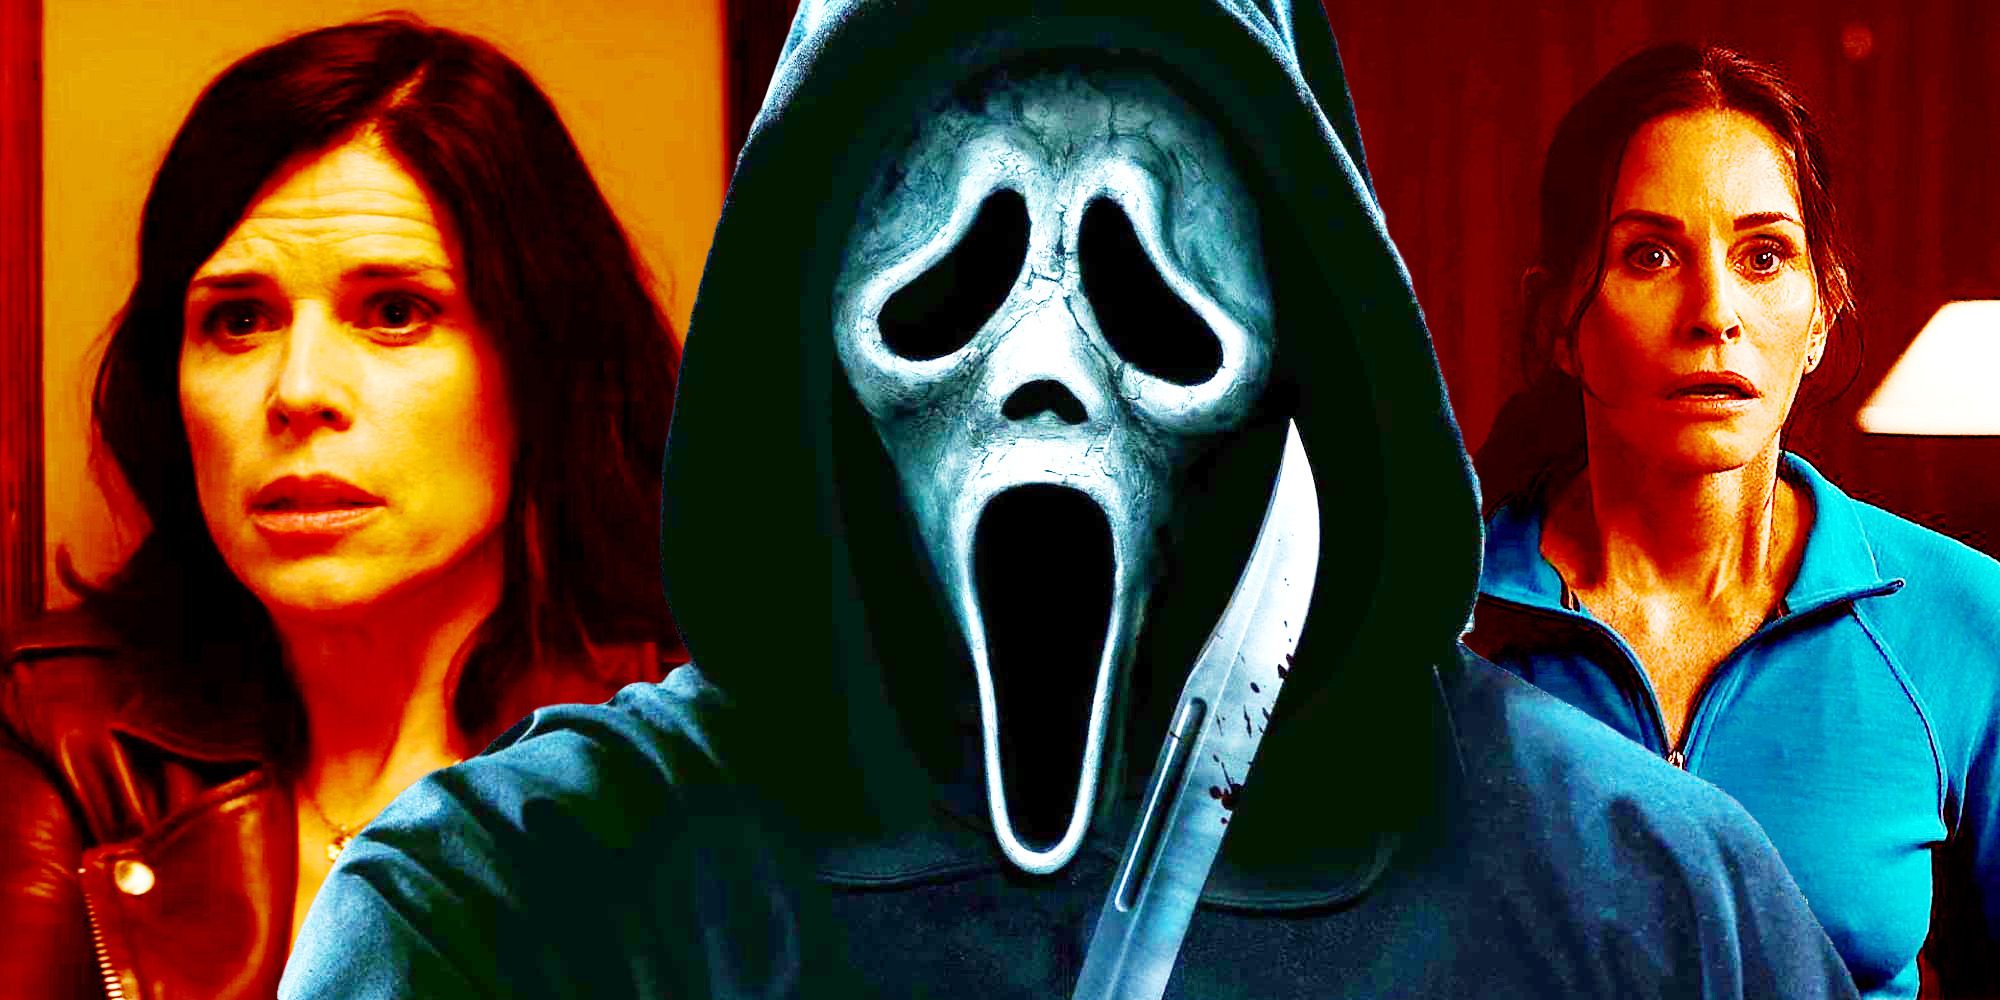 Scream Neve Campbell as Sidney Prescott Ghostface Courtney Cox as Gale Weathers